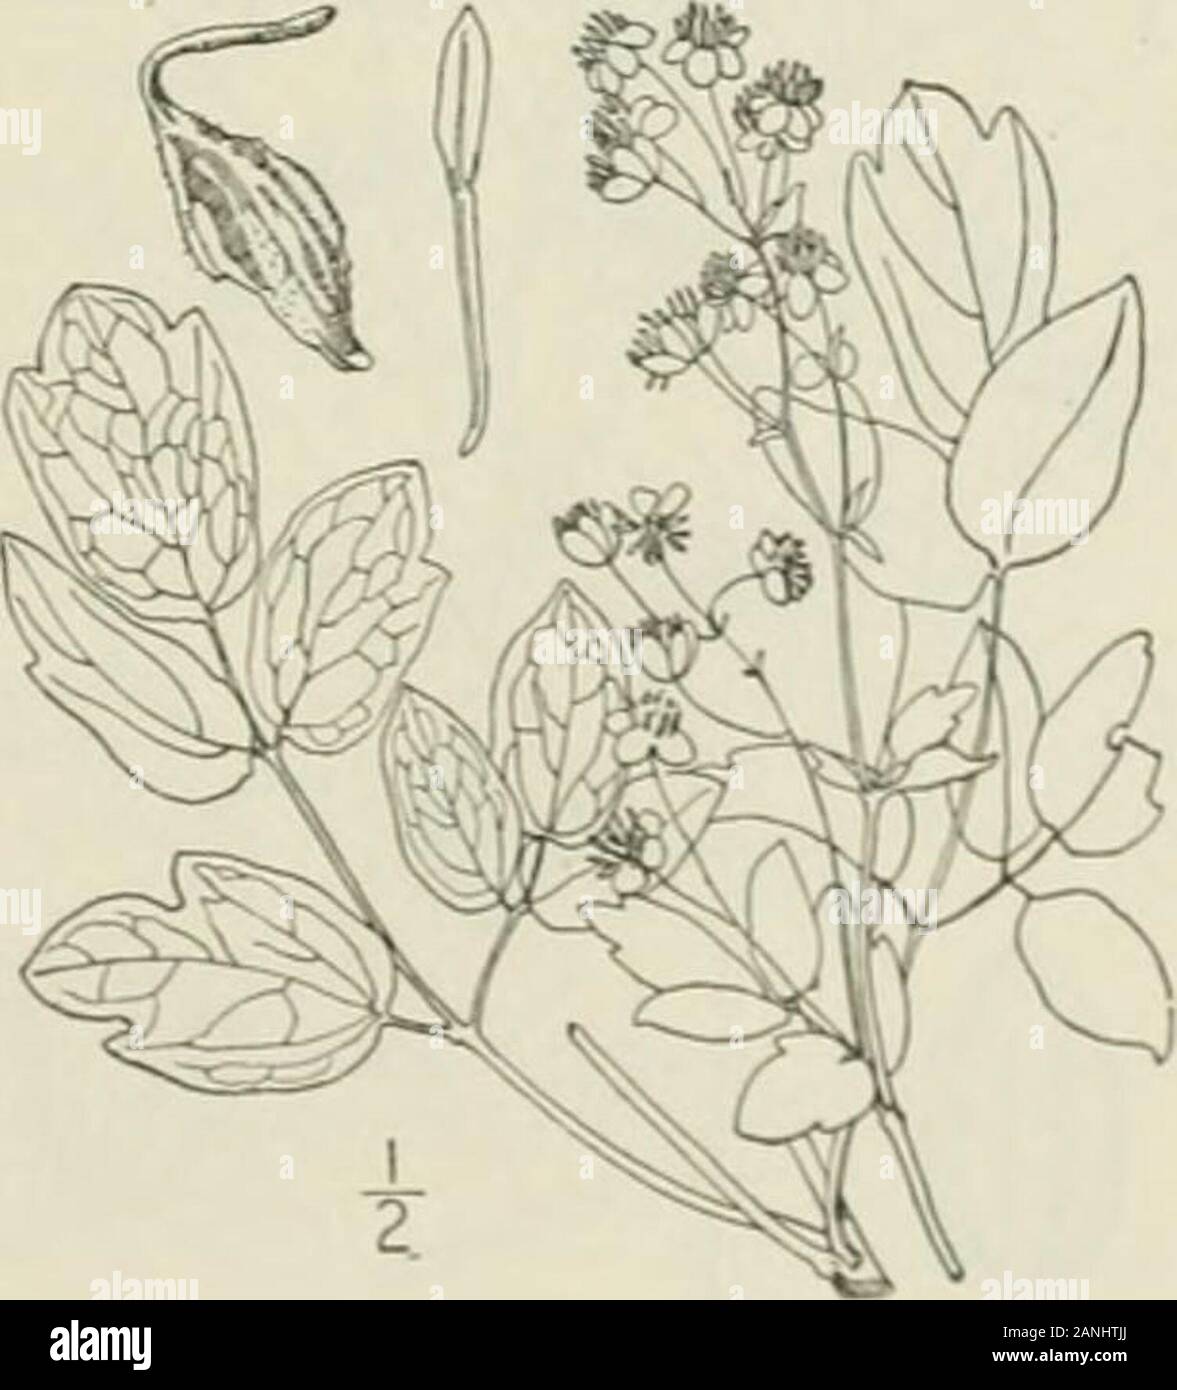 An illustrated flora of the northern United States, Canada and the British possessions : from Newfoundland to the parallel of the southern boundary of Virginia and from the Atlantic Ocean westward to the 102nd meridian; 2nd ed. . 5. Thalictrum revolutum DC. axyMeadow-Rue. Fig. 1936. Thalictrum revolutum DC. Syst. i: 173. 1818.T. purpurascens var. ceriferum Austin : A. Gray. Man.Ed. 5, 39. 1867. .Stem mostly stout, often purplish, t,°-7° high,.glabrous or nearly so. Leaves 3-4-ternatc, the lowerpetiolcd, the upper sessile or short pctioled; leafletsfirm in texture, ovate to obovate. 1-3-lobcd Stock Photo